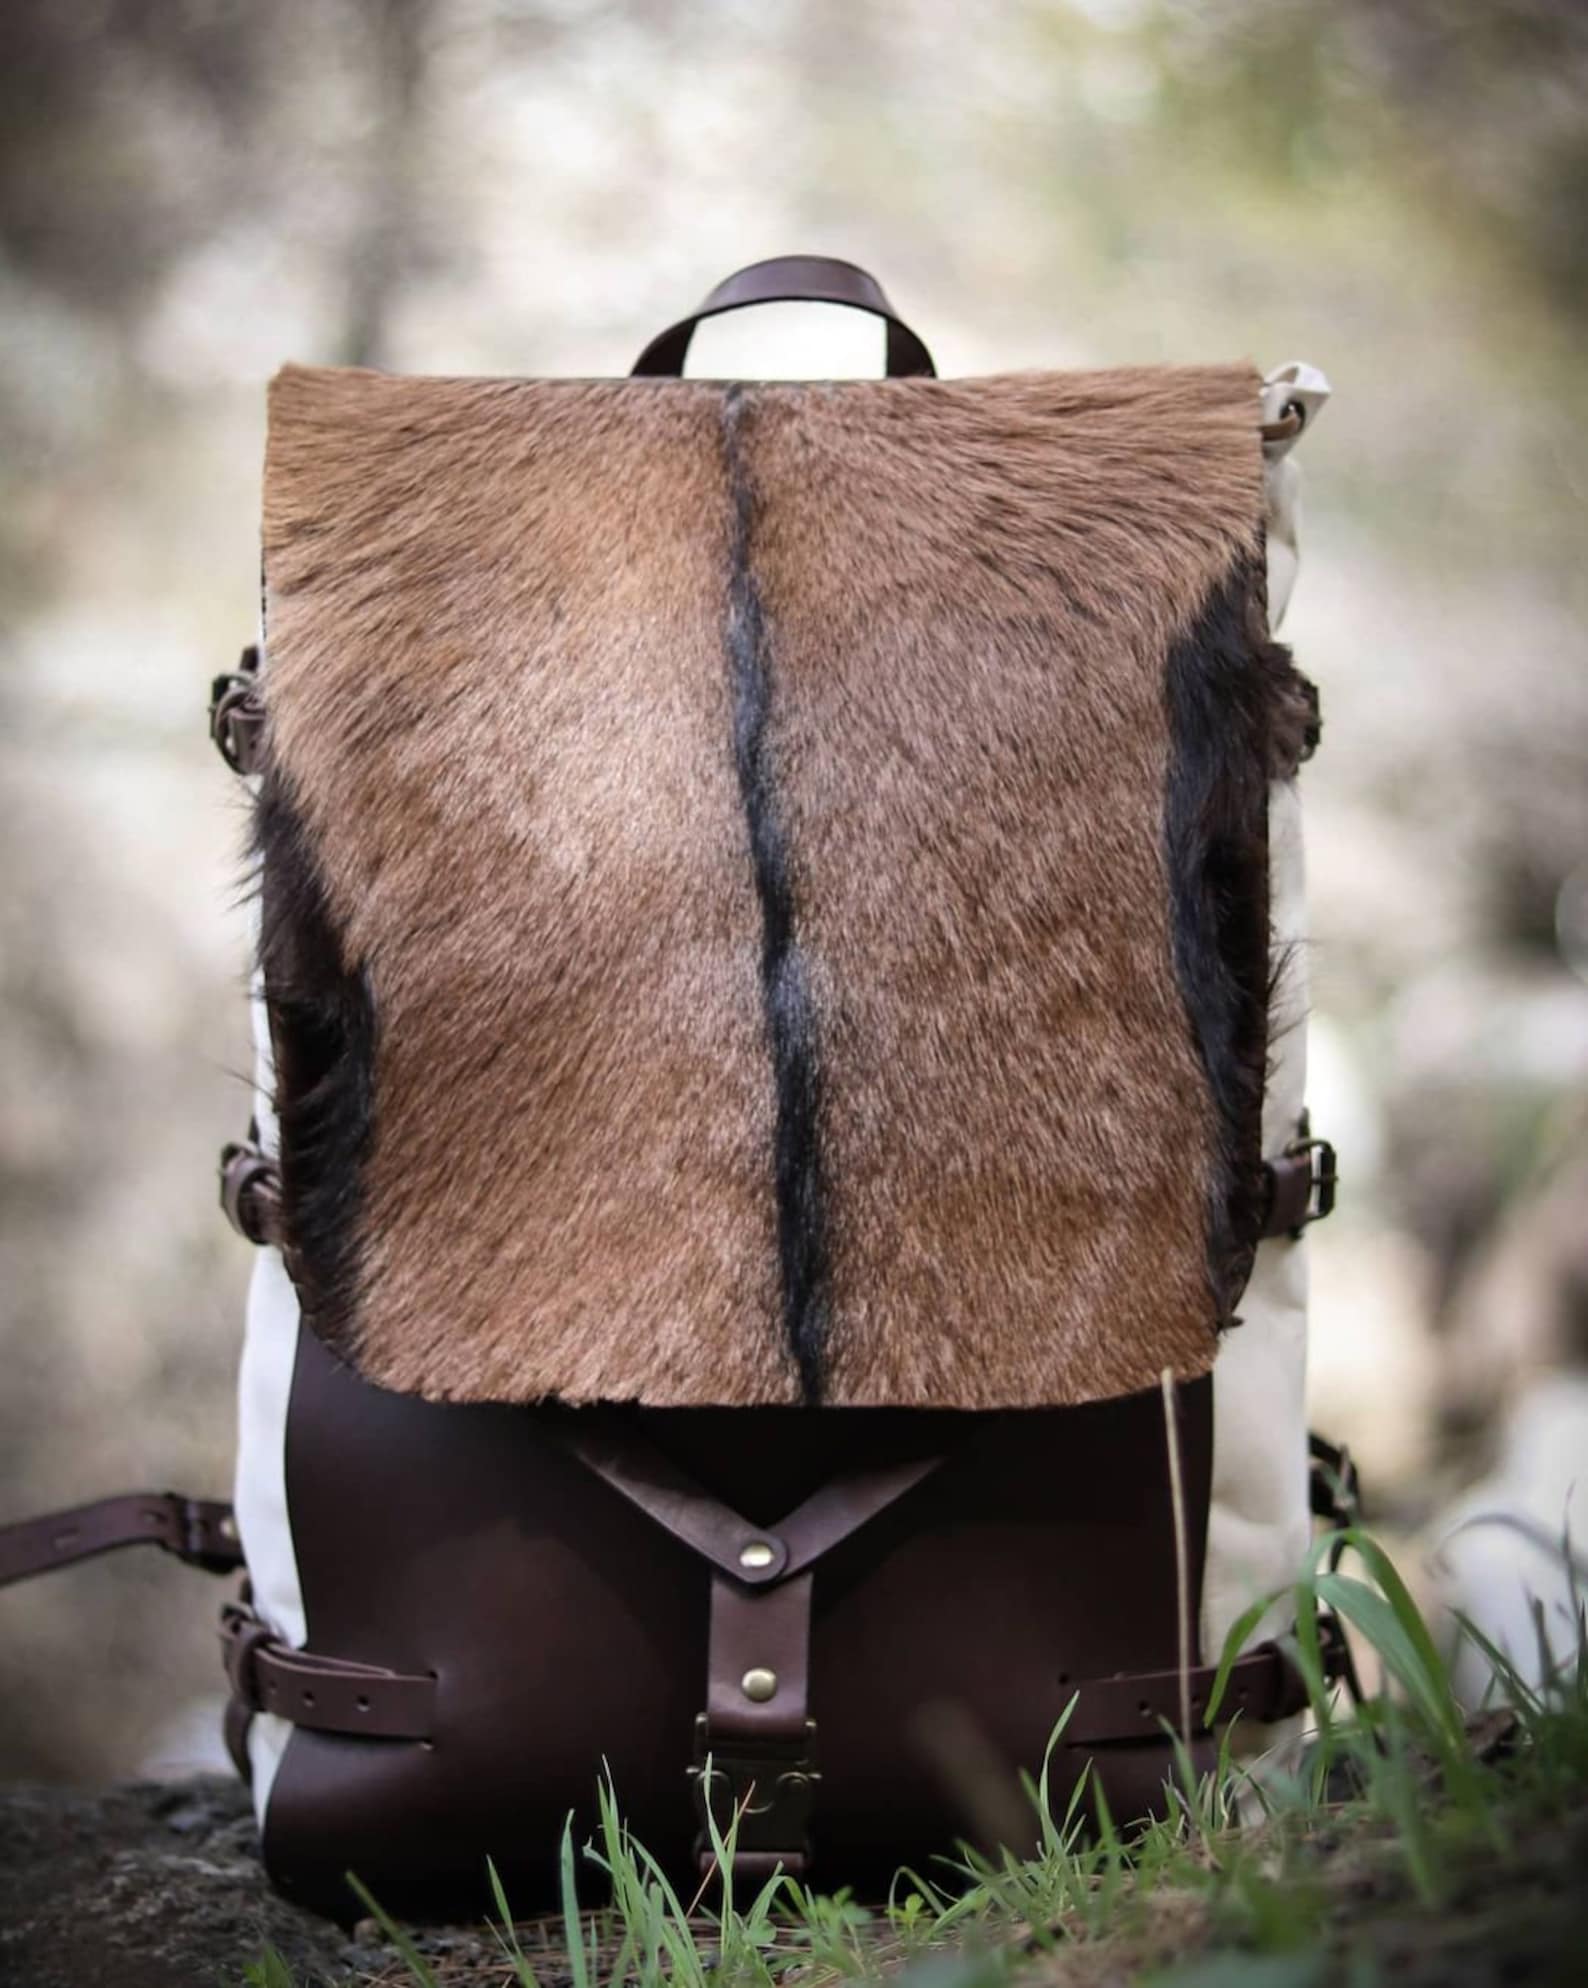 Goat Fur , Canvas and Leather Bag | Bushcraft | Camping | Outdoor | Hiking | Handmade Backpack l  | 30,40,50 Litres option bushcraft - camping - hiking backpack 99percenthandmade White 30 With Fur